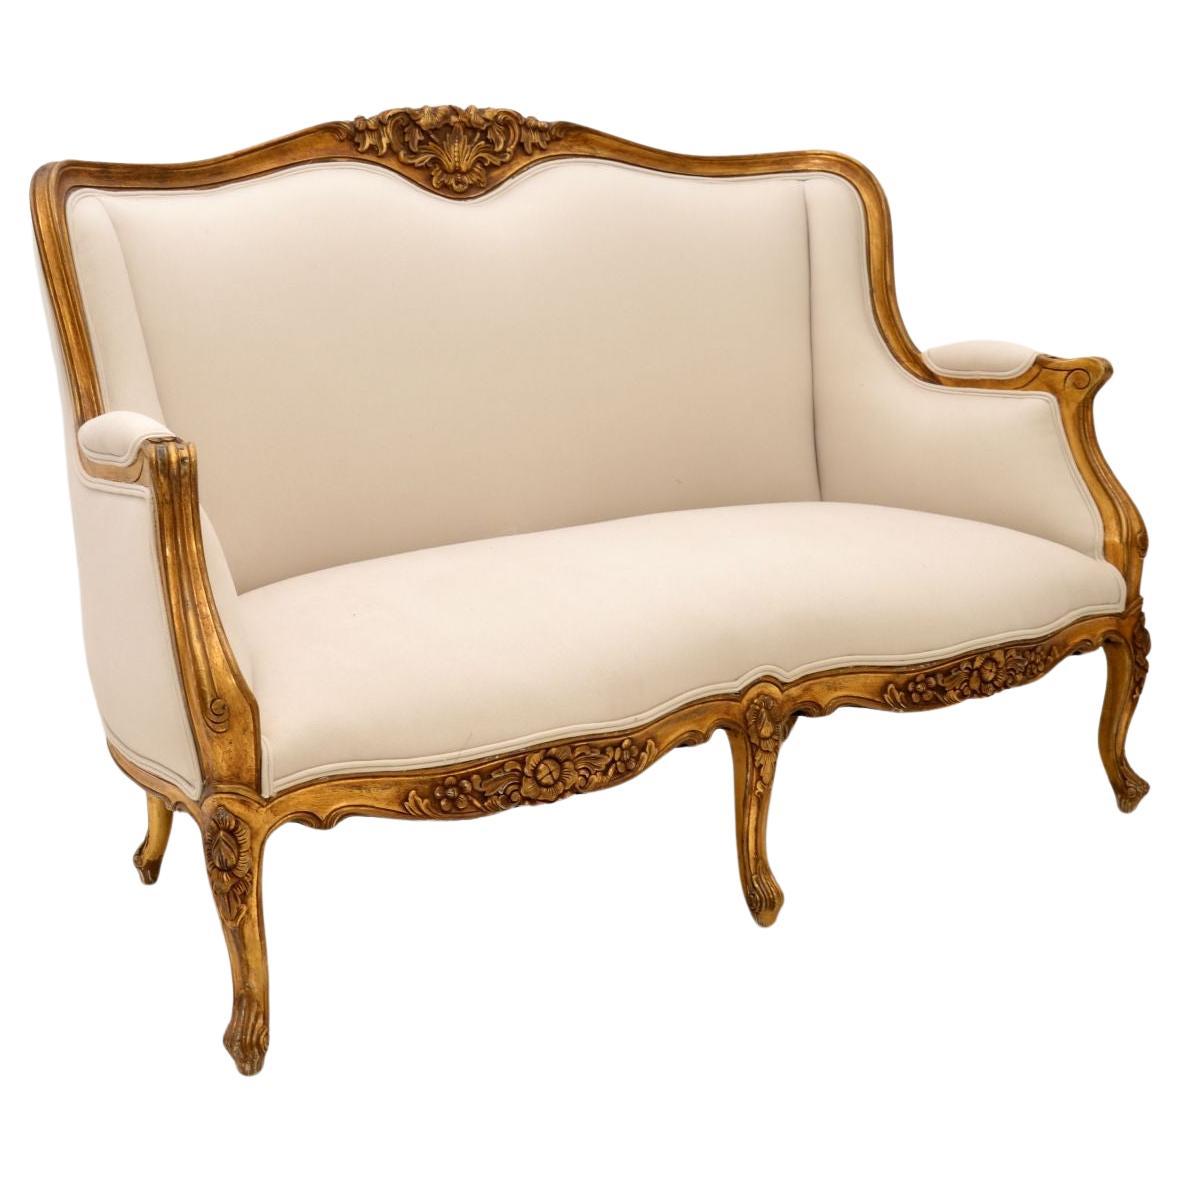 Antique French Louis Style Gilt Wood Sofa For Sale